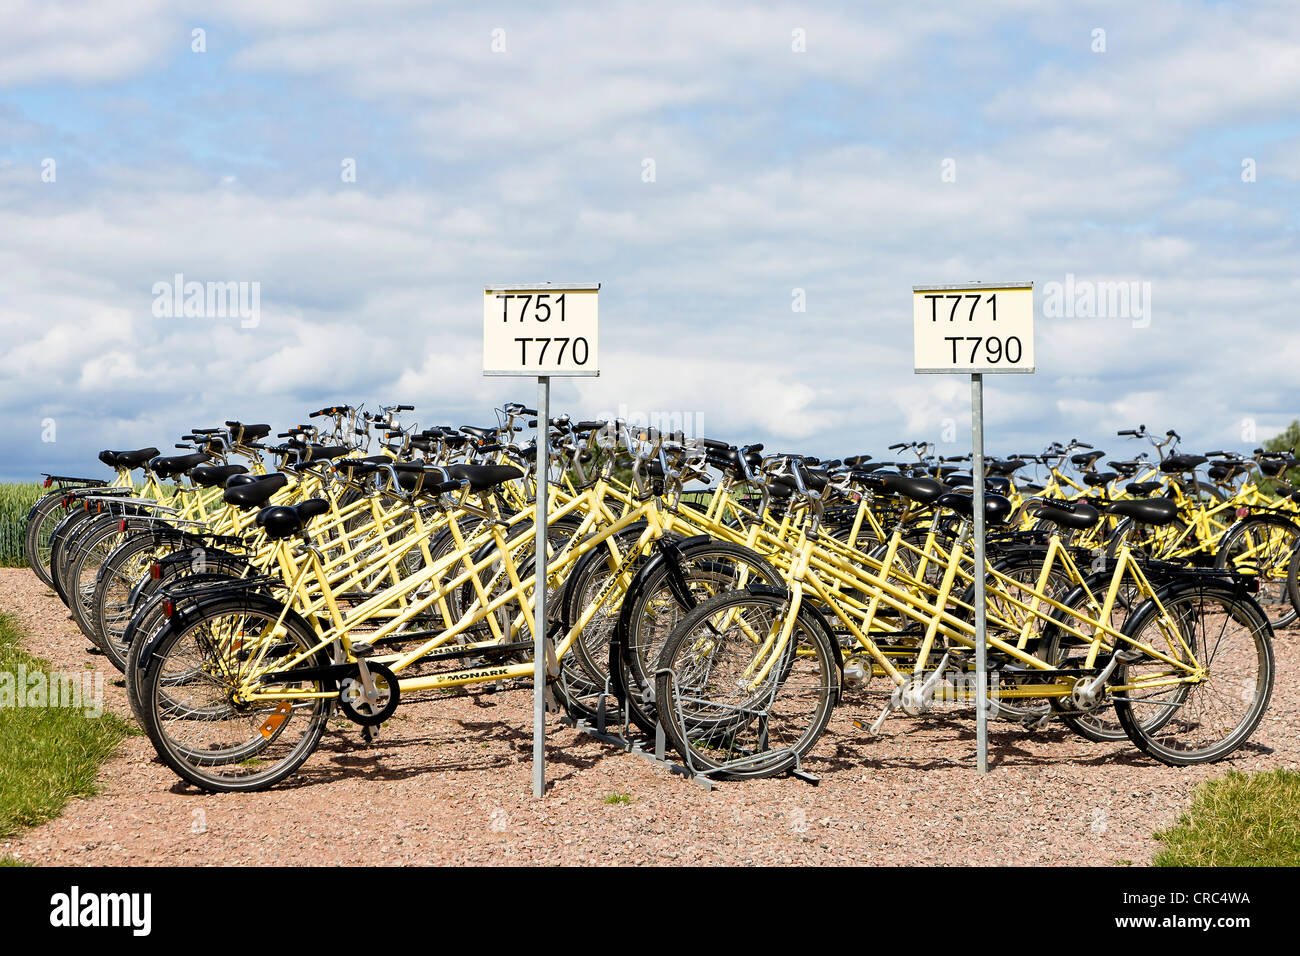 Tandem bicycles for hire on the island of Hven or Ven in Oresund, Sweden, Europe Stock Photo